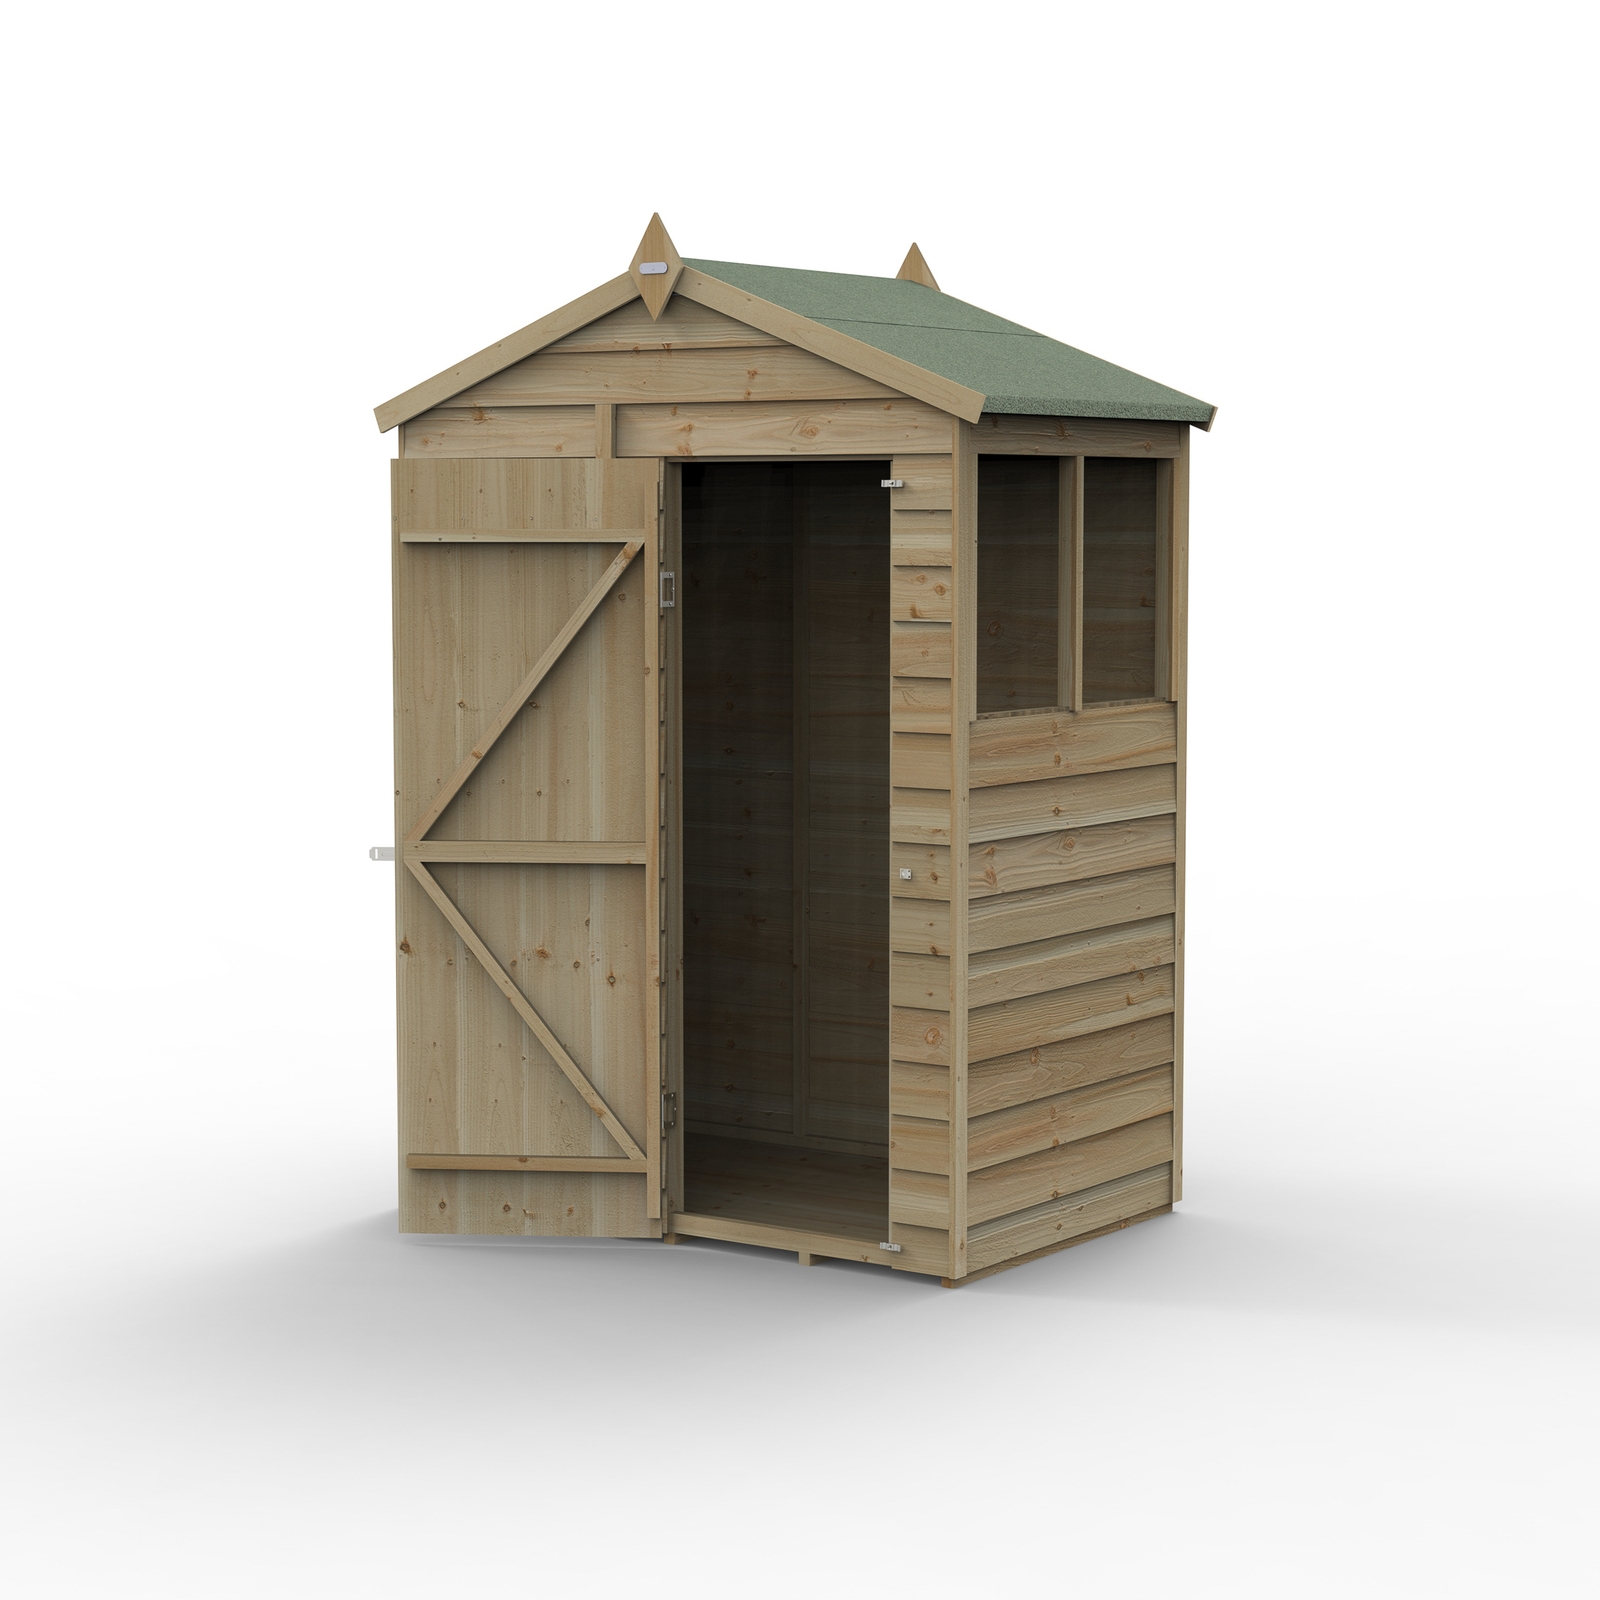 Forest Garden 4LIFE Apex Shed 5 x 3ft - Single Door 2 Window (Home Delivery)